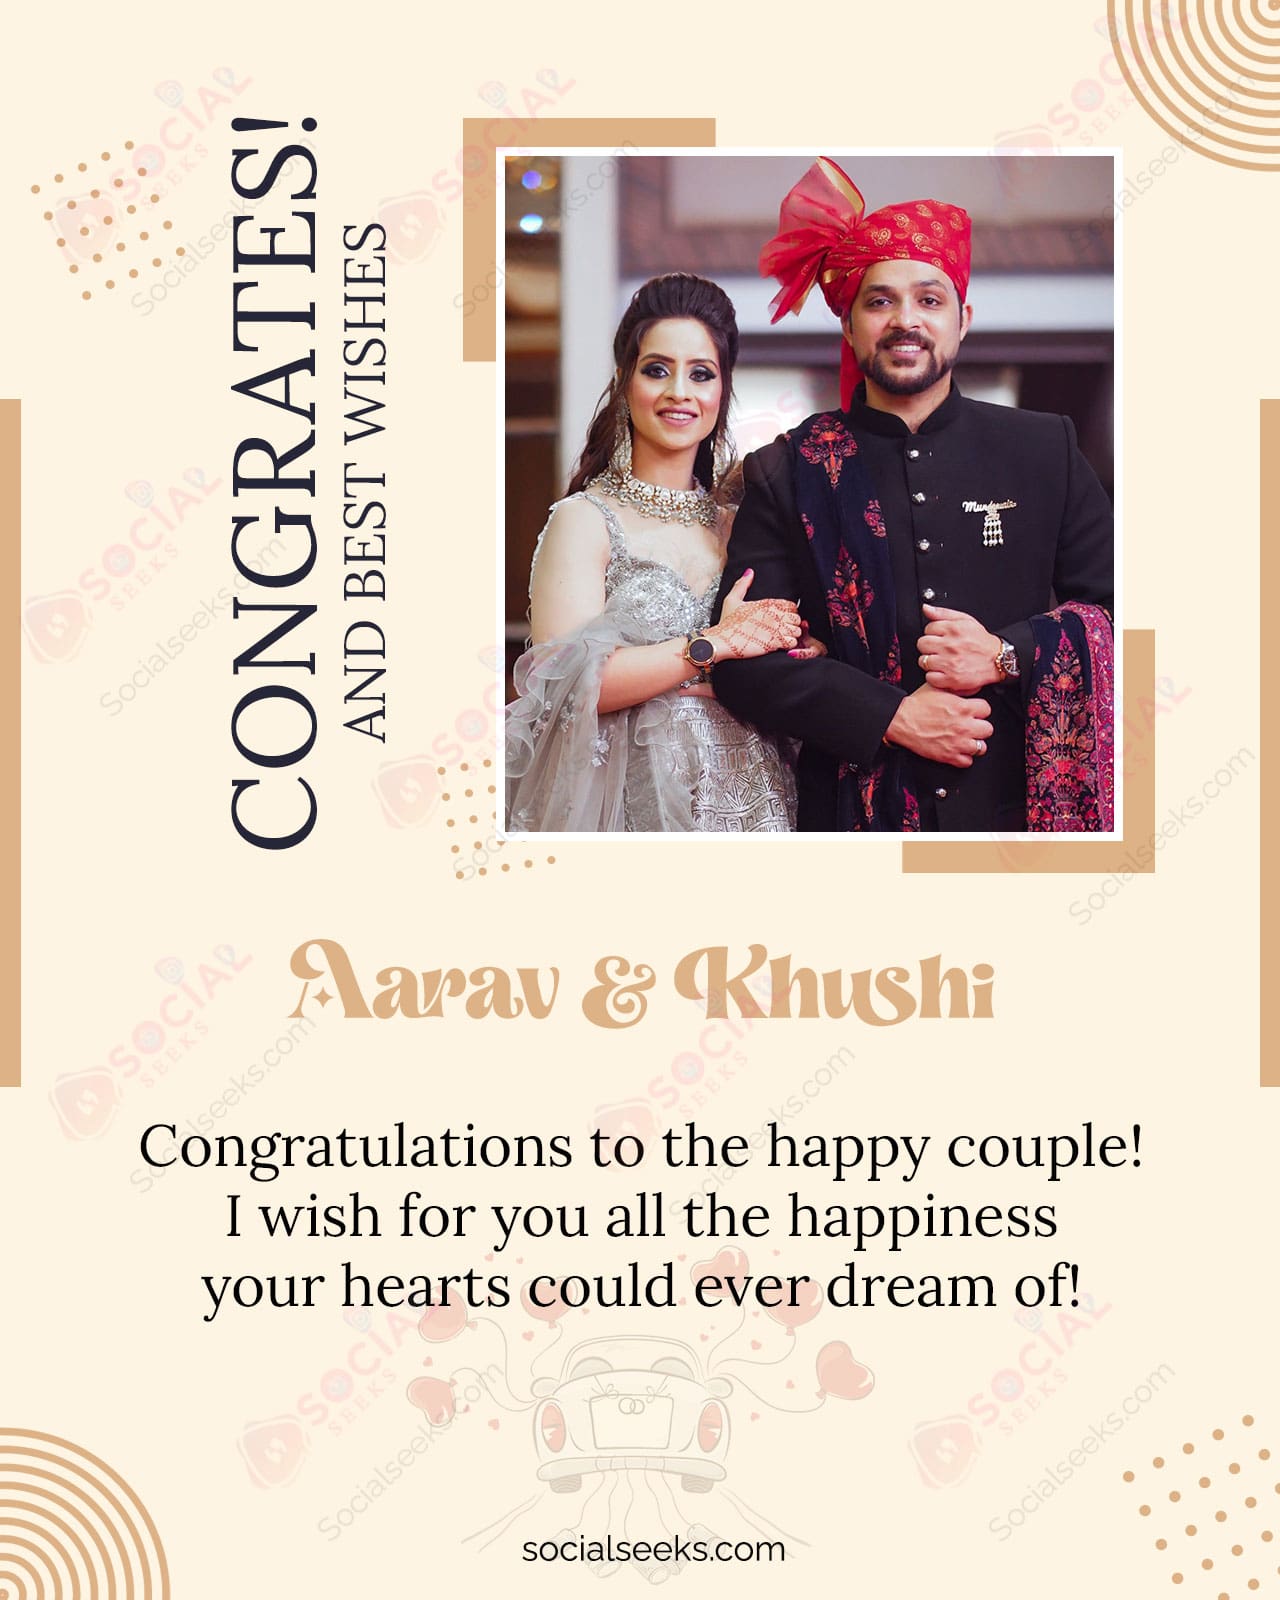 Wedding Congratulations Cards With Customized Photo & Name